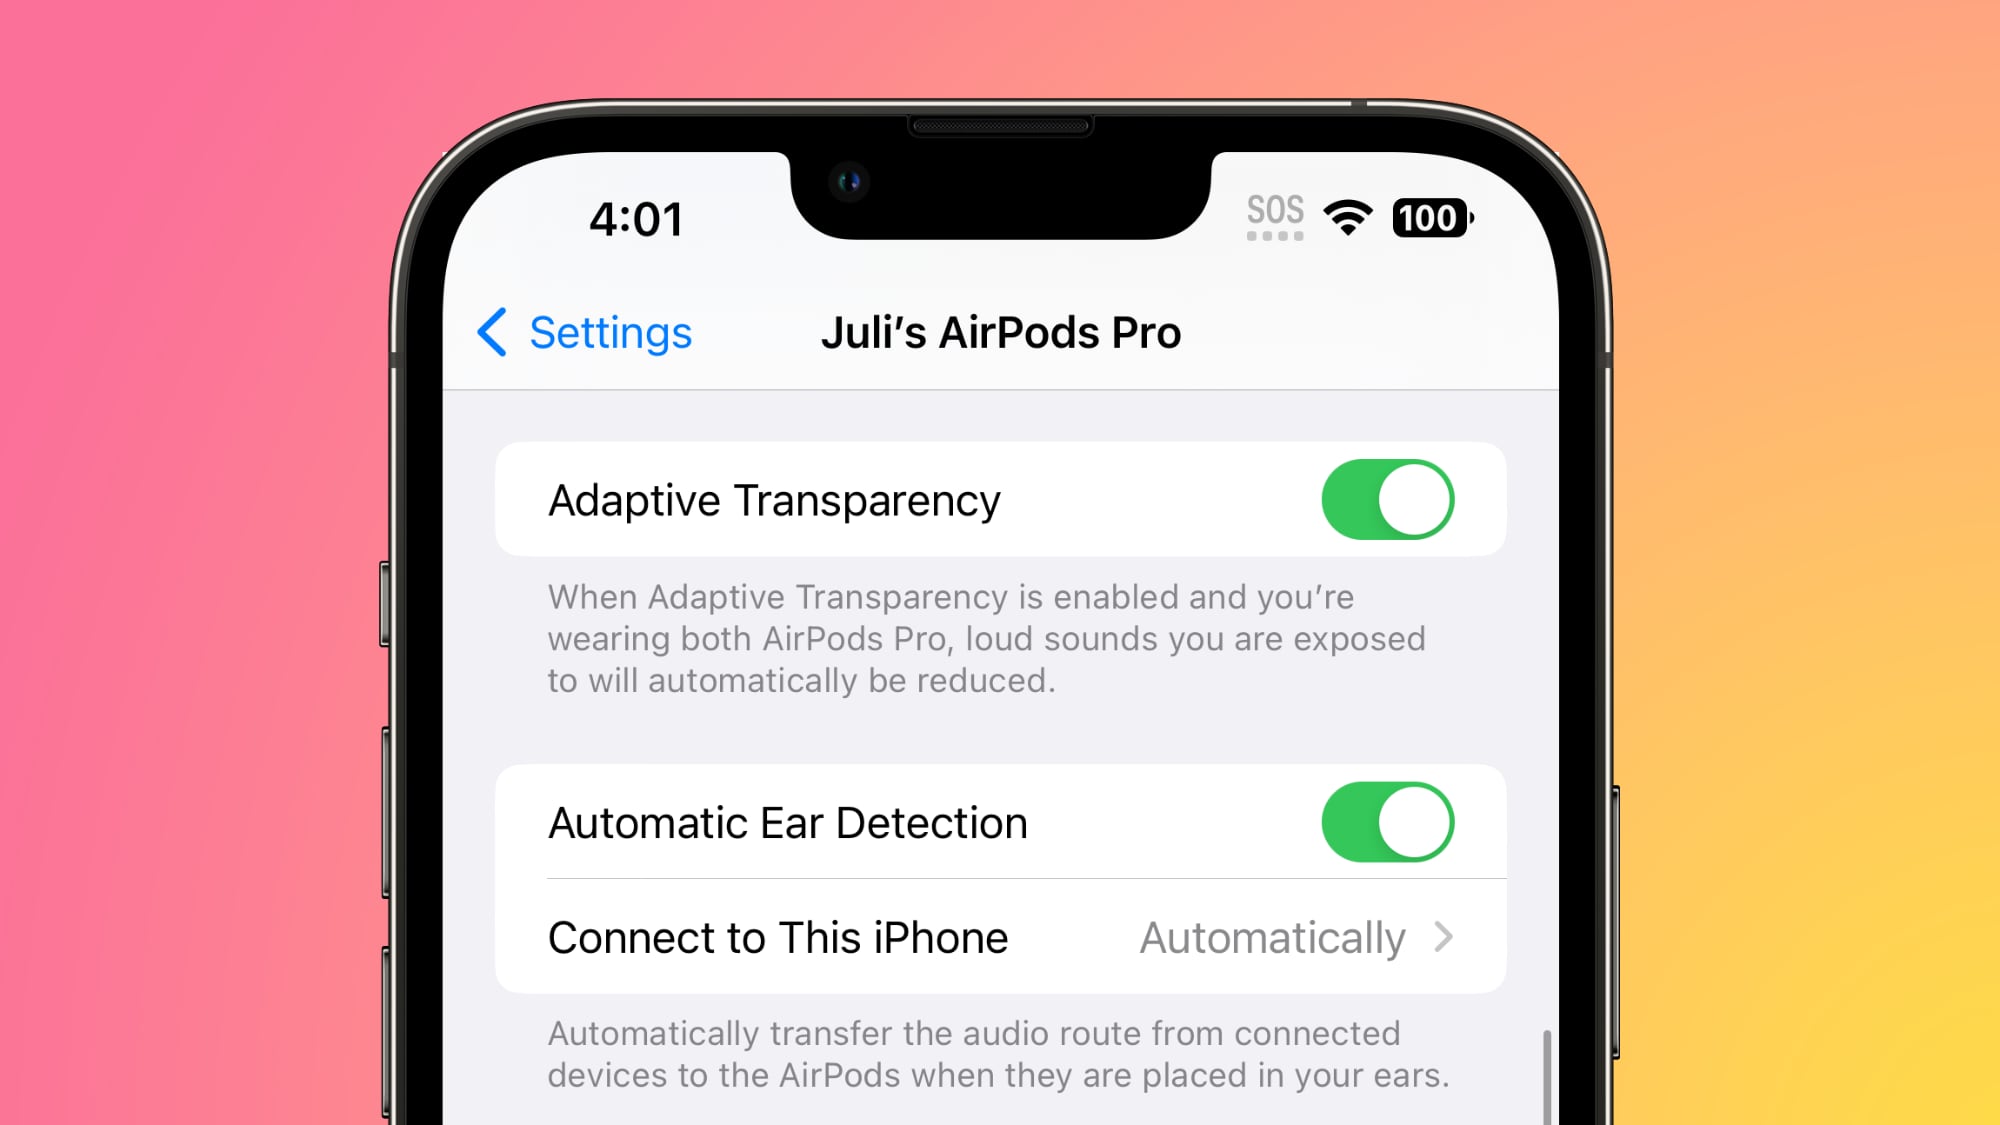 Gurman: iOS 16.1 Adaptive Transparency Option for Original AirPods Pro and AirPods Max is a Bug